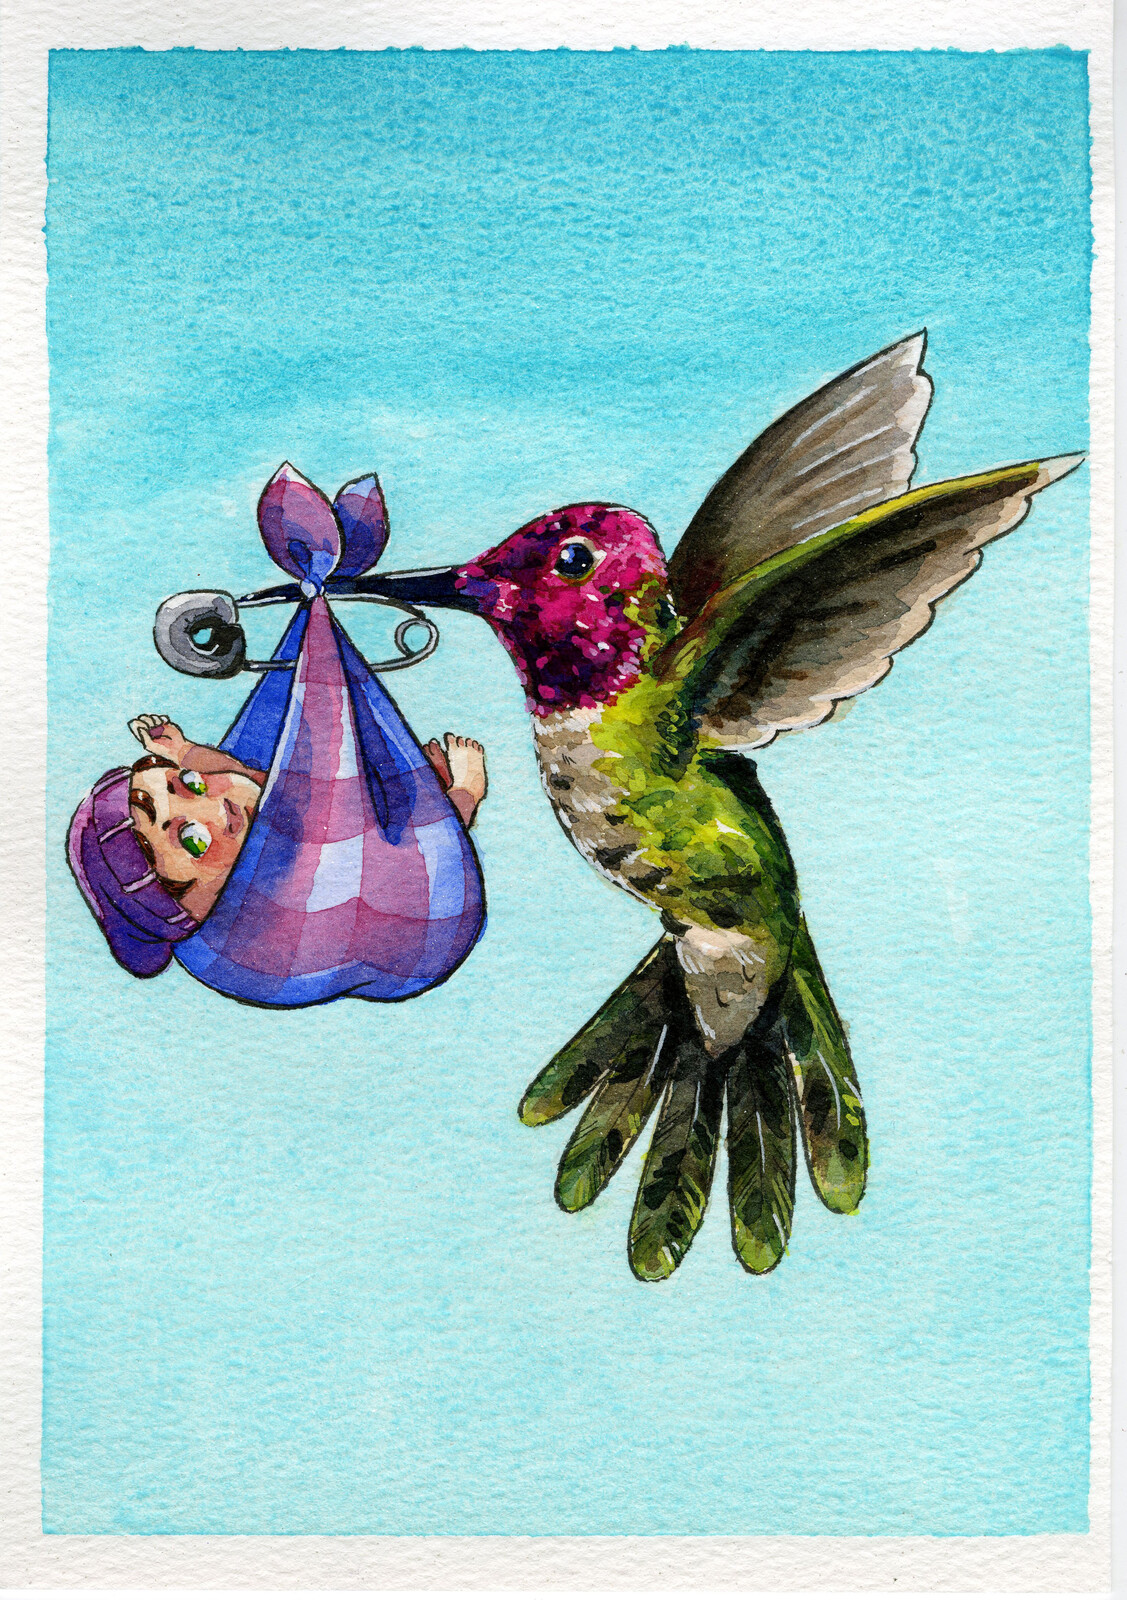 Watercolor illustration of a hummingbird delivering a newbory Lilliputian.  Painted on Paul Rubens Iridescent watercolor paper with Paul Rubens Paints.